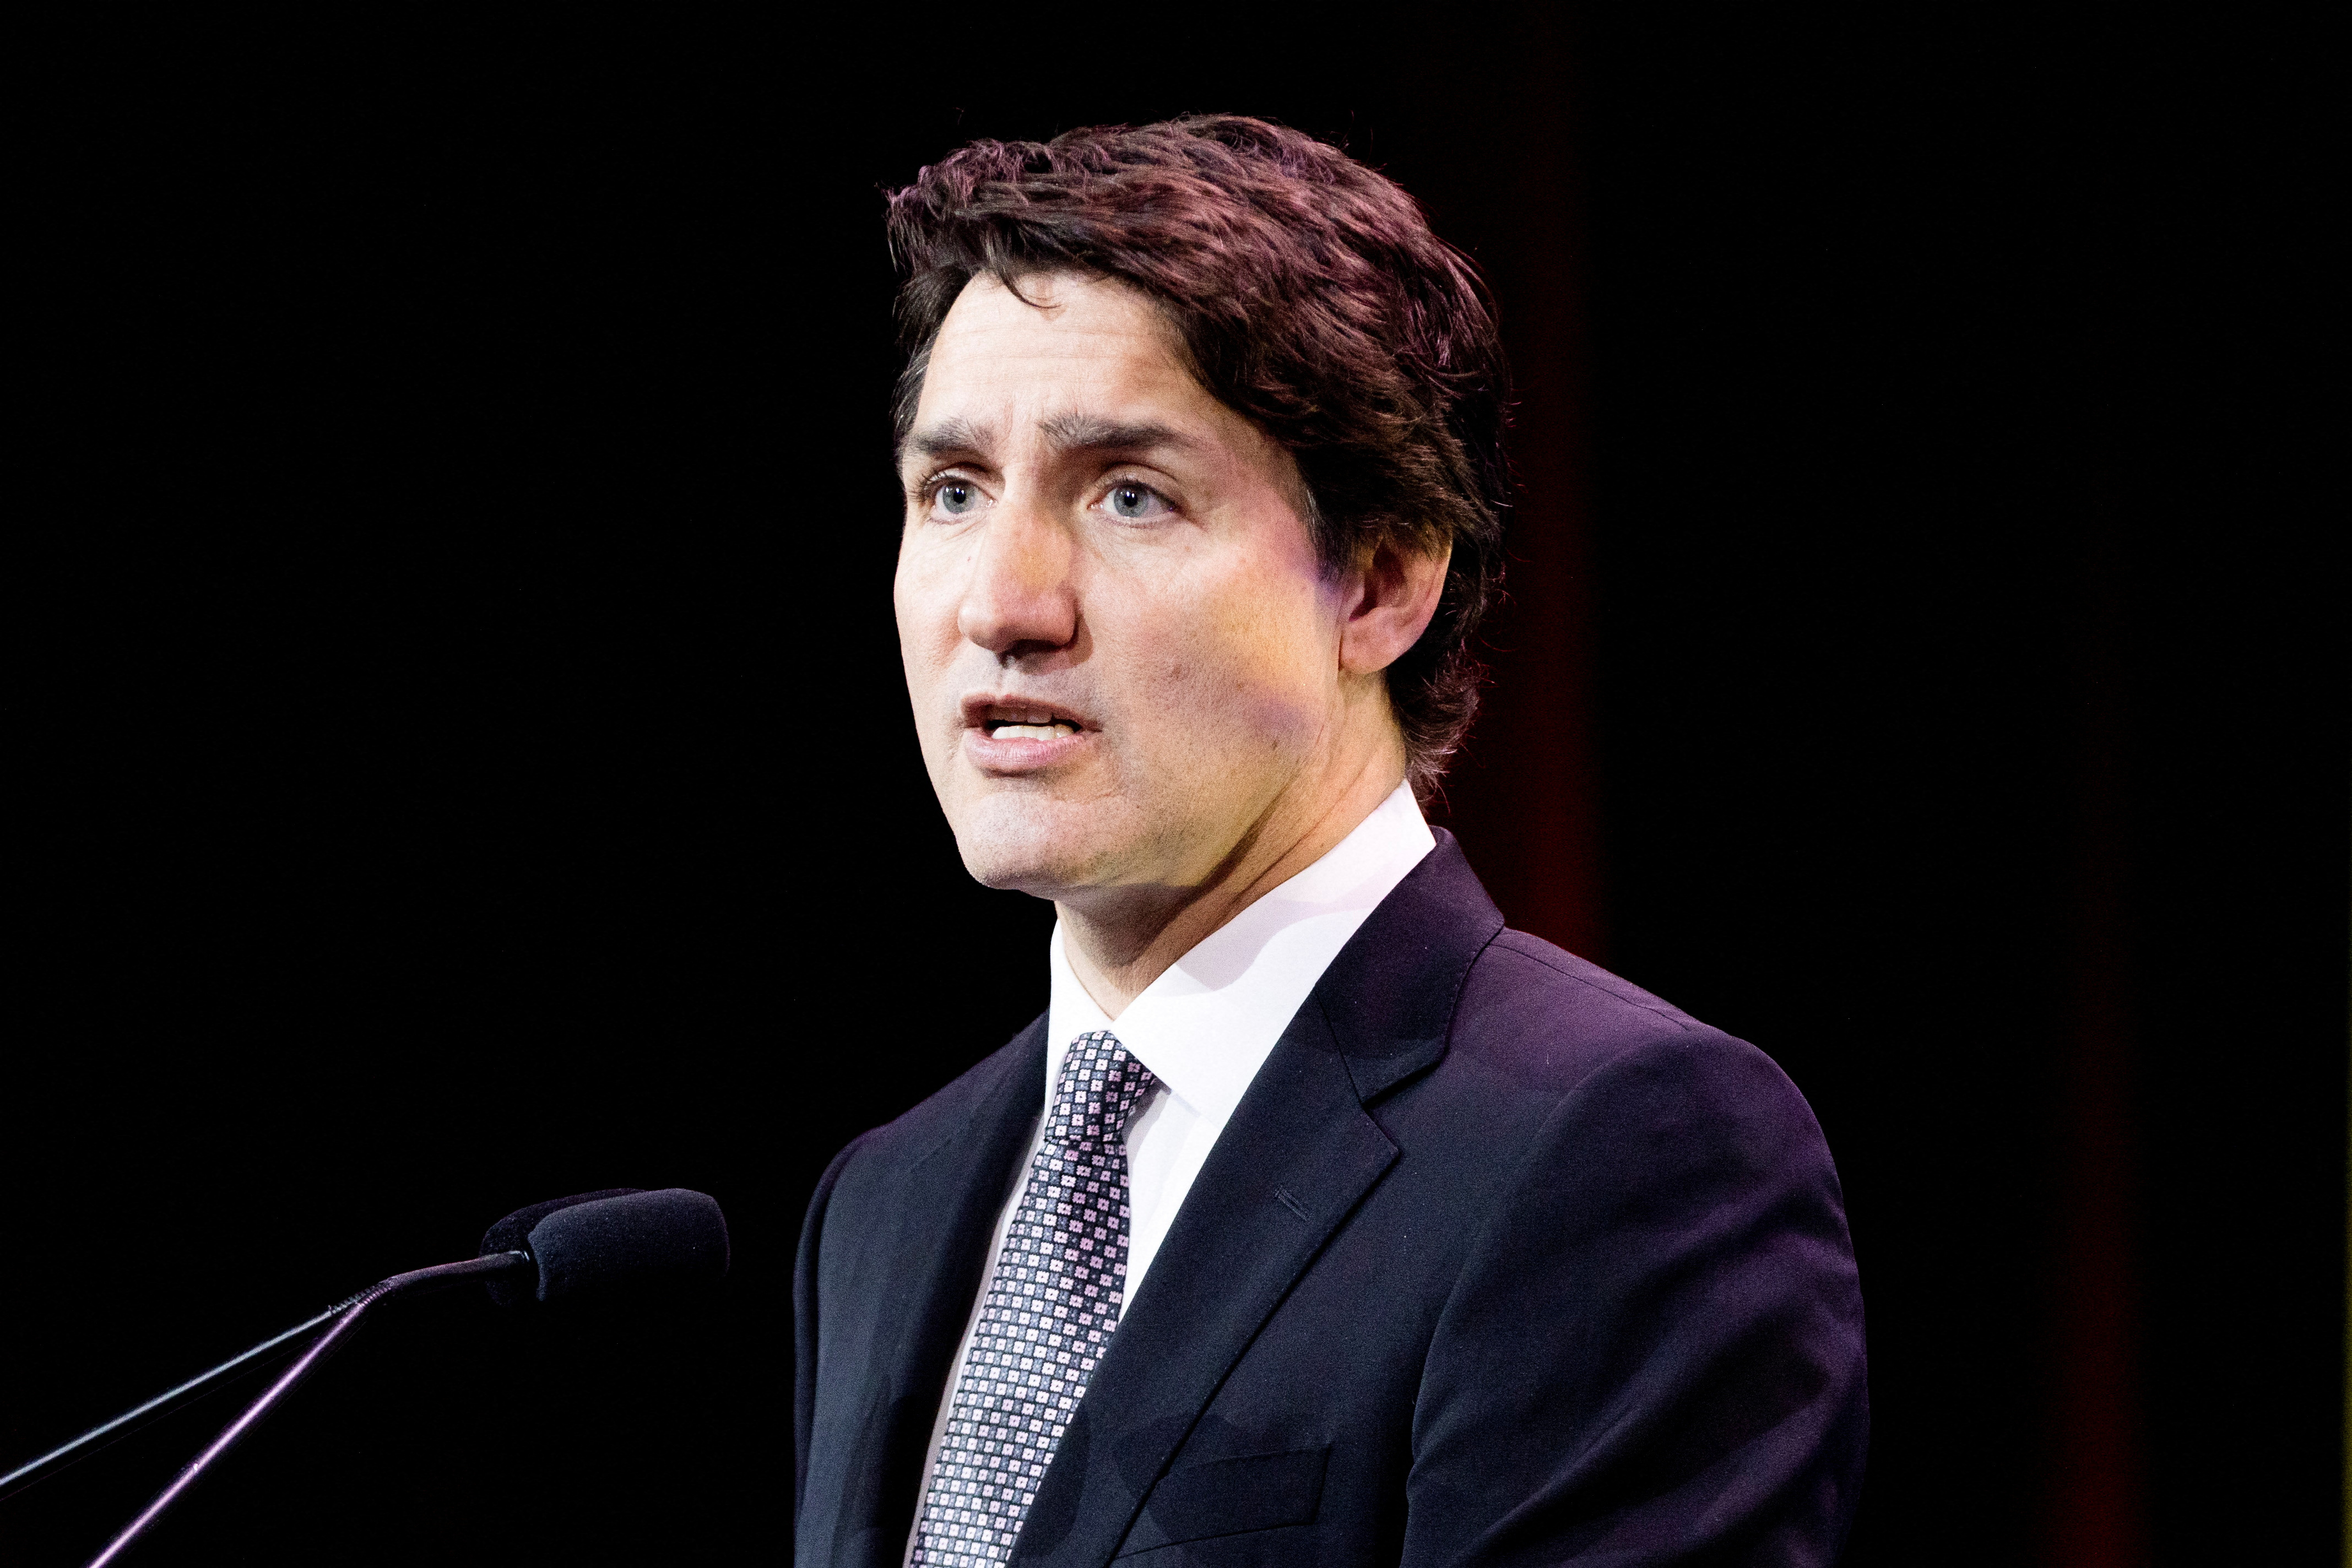 Prime Minister Justin Trudeau speaks at the FCM conference in Toronto